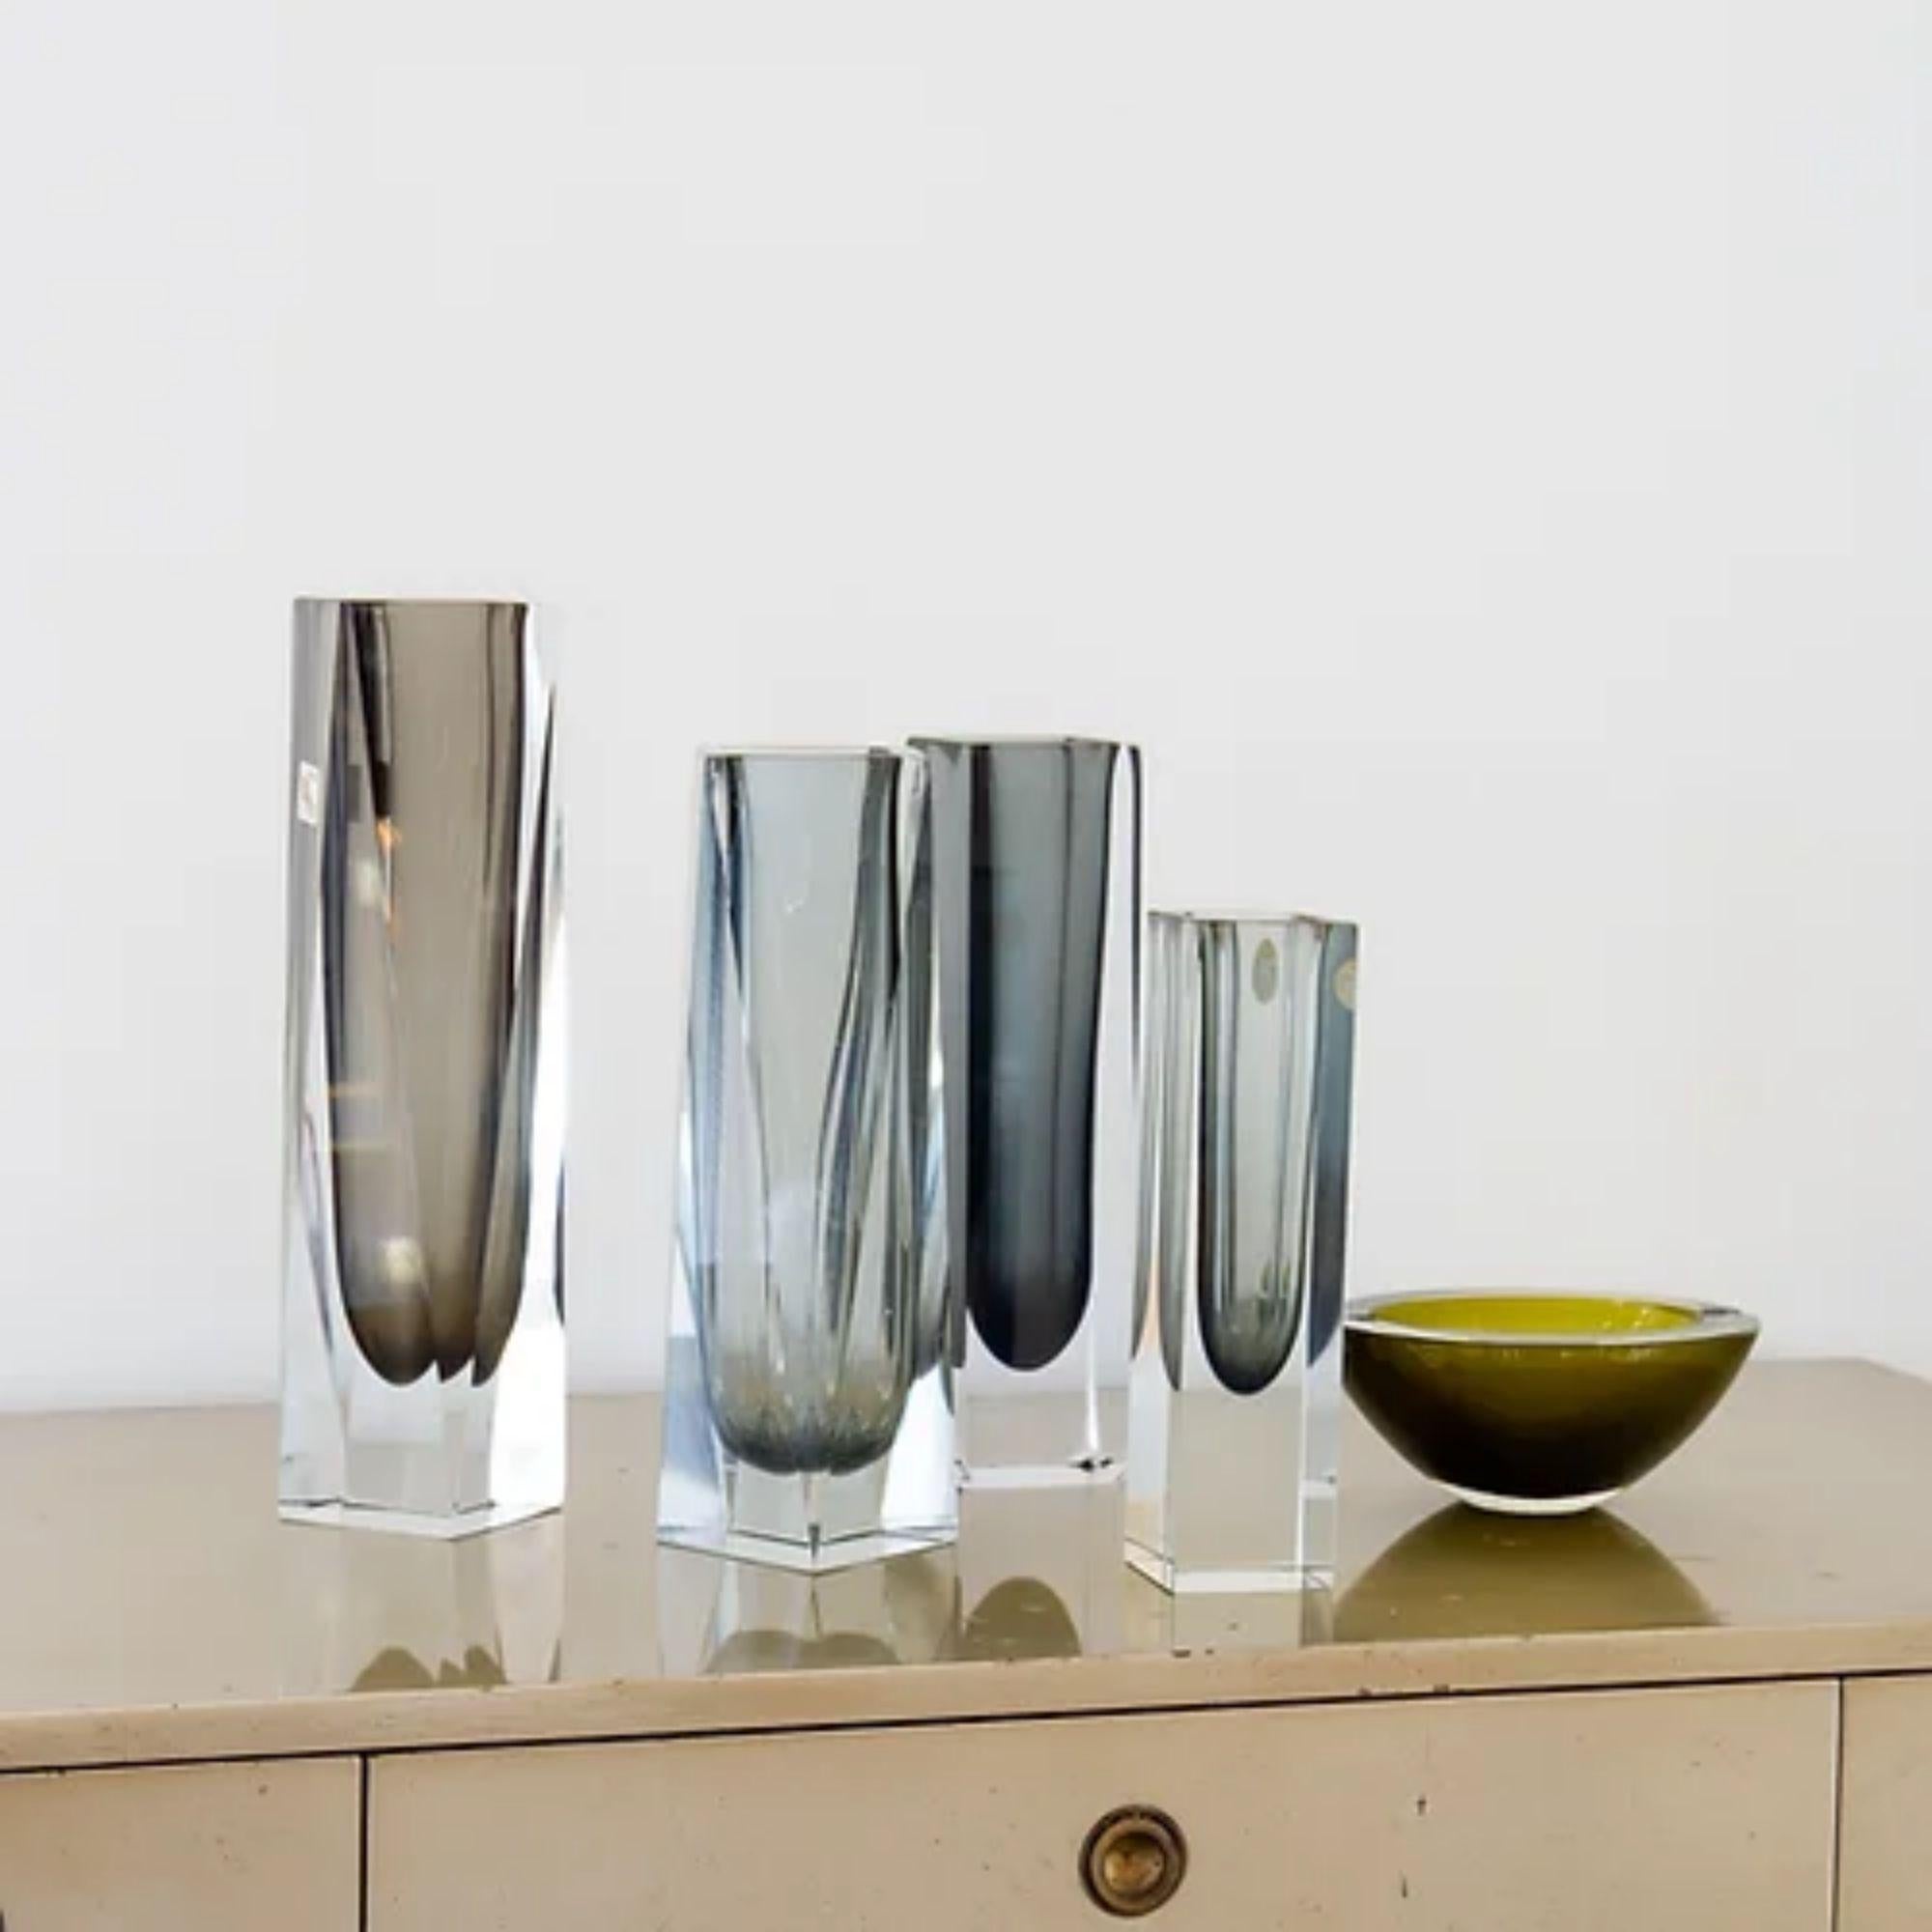 A group of charcoal Murano glass vases and an ashtray comprising of:

A Large Unusual Facet Cut Murano Sommerso Glass Vase with a Charcoal Centre Cased in Clear Glass stamped, small chip to bottom corner.
30.5cms high x 7.5cms square

A Rectangular